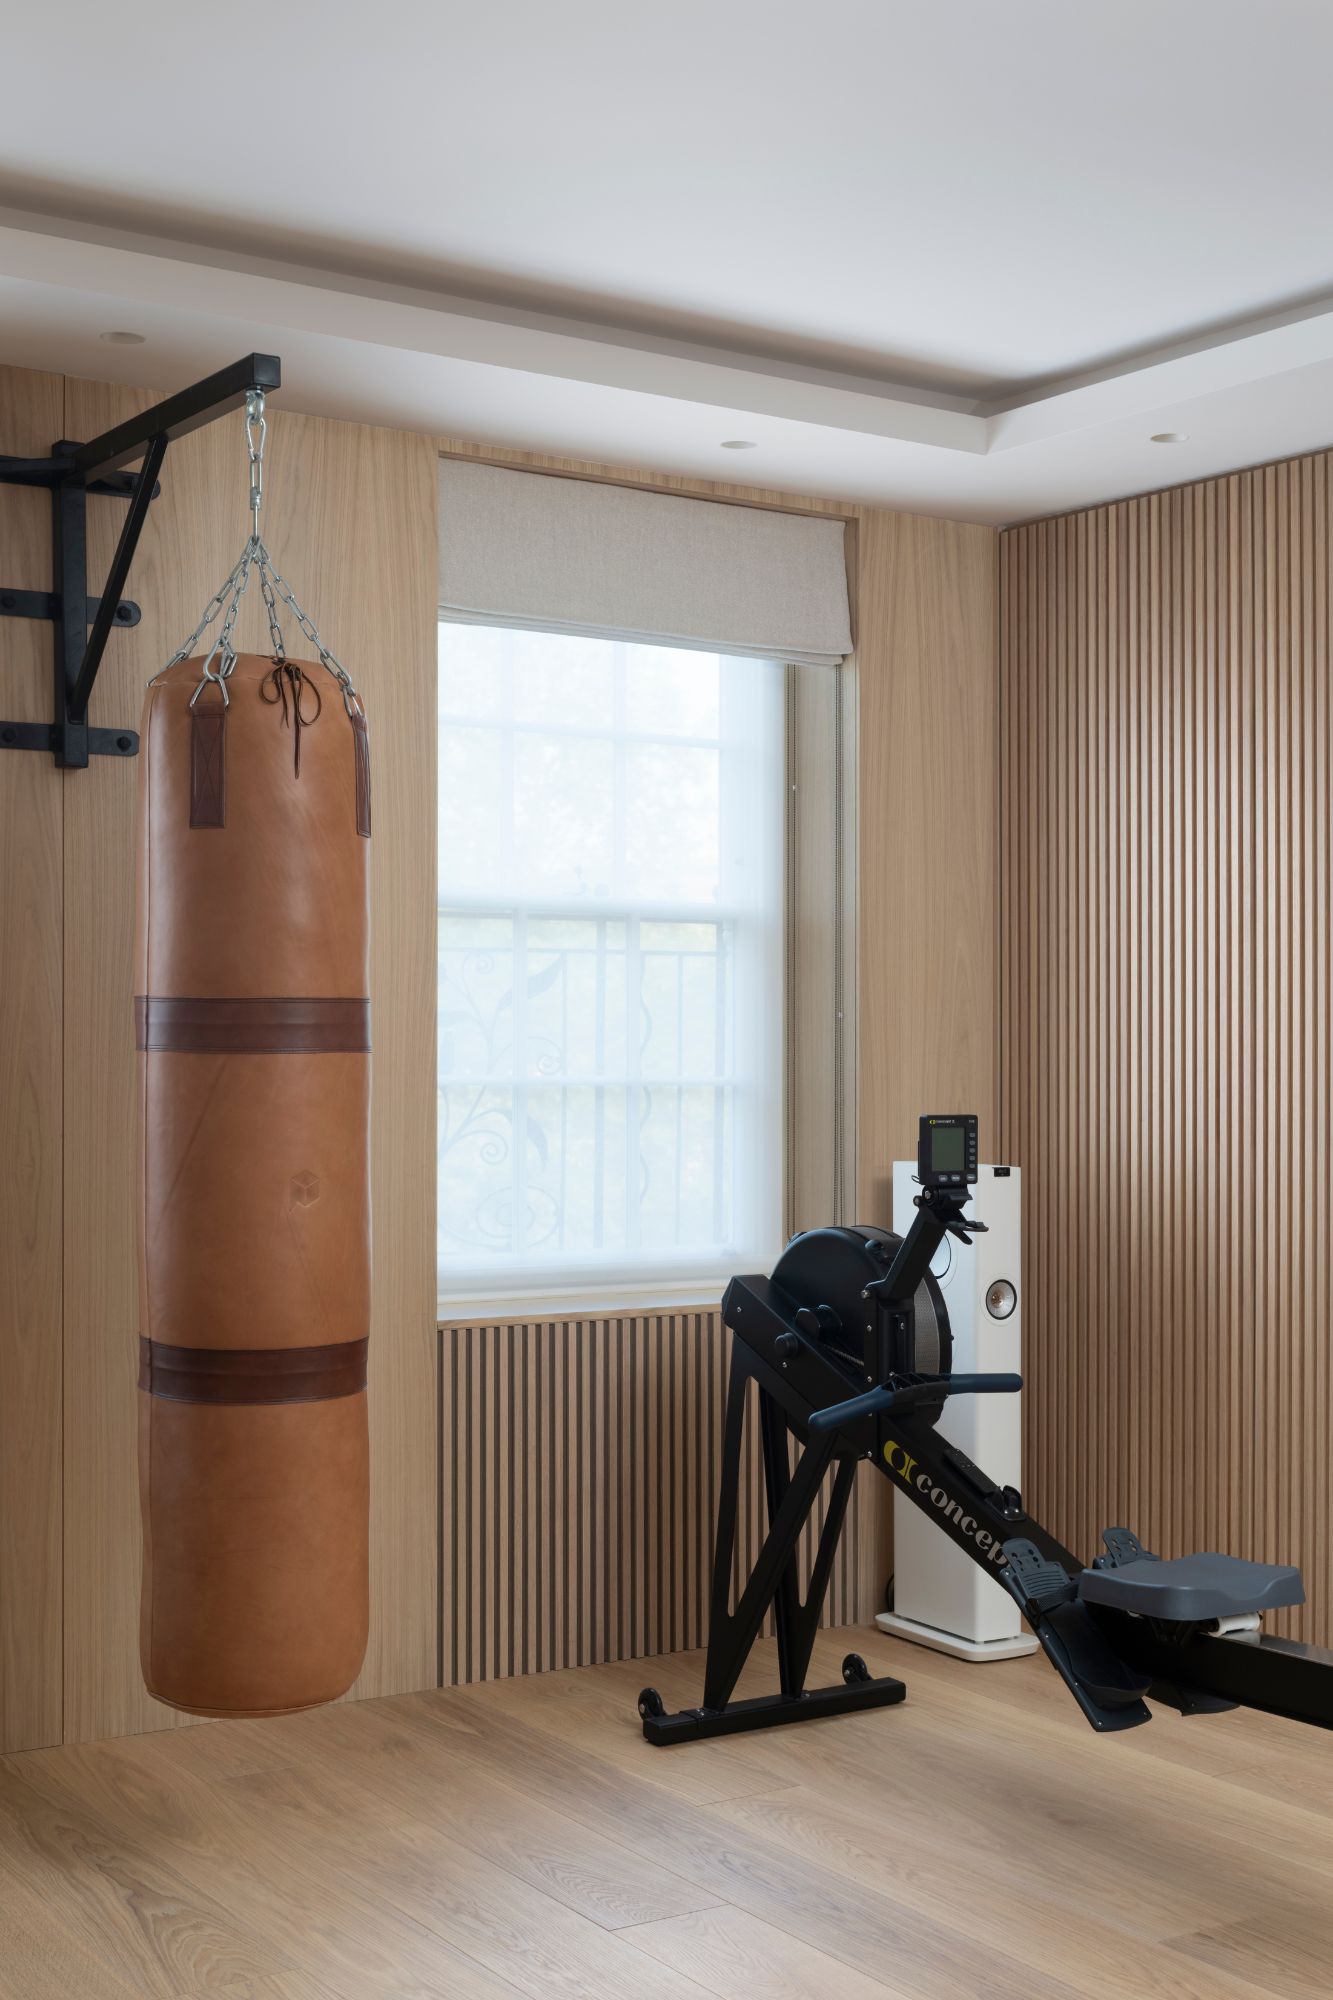 Paragon Studio, Paragon Studio Delivers Ambitious Design for Bespoke Home Gym in Knightsbridge Property